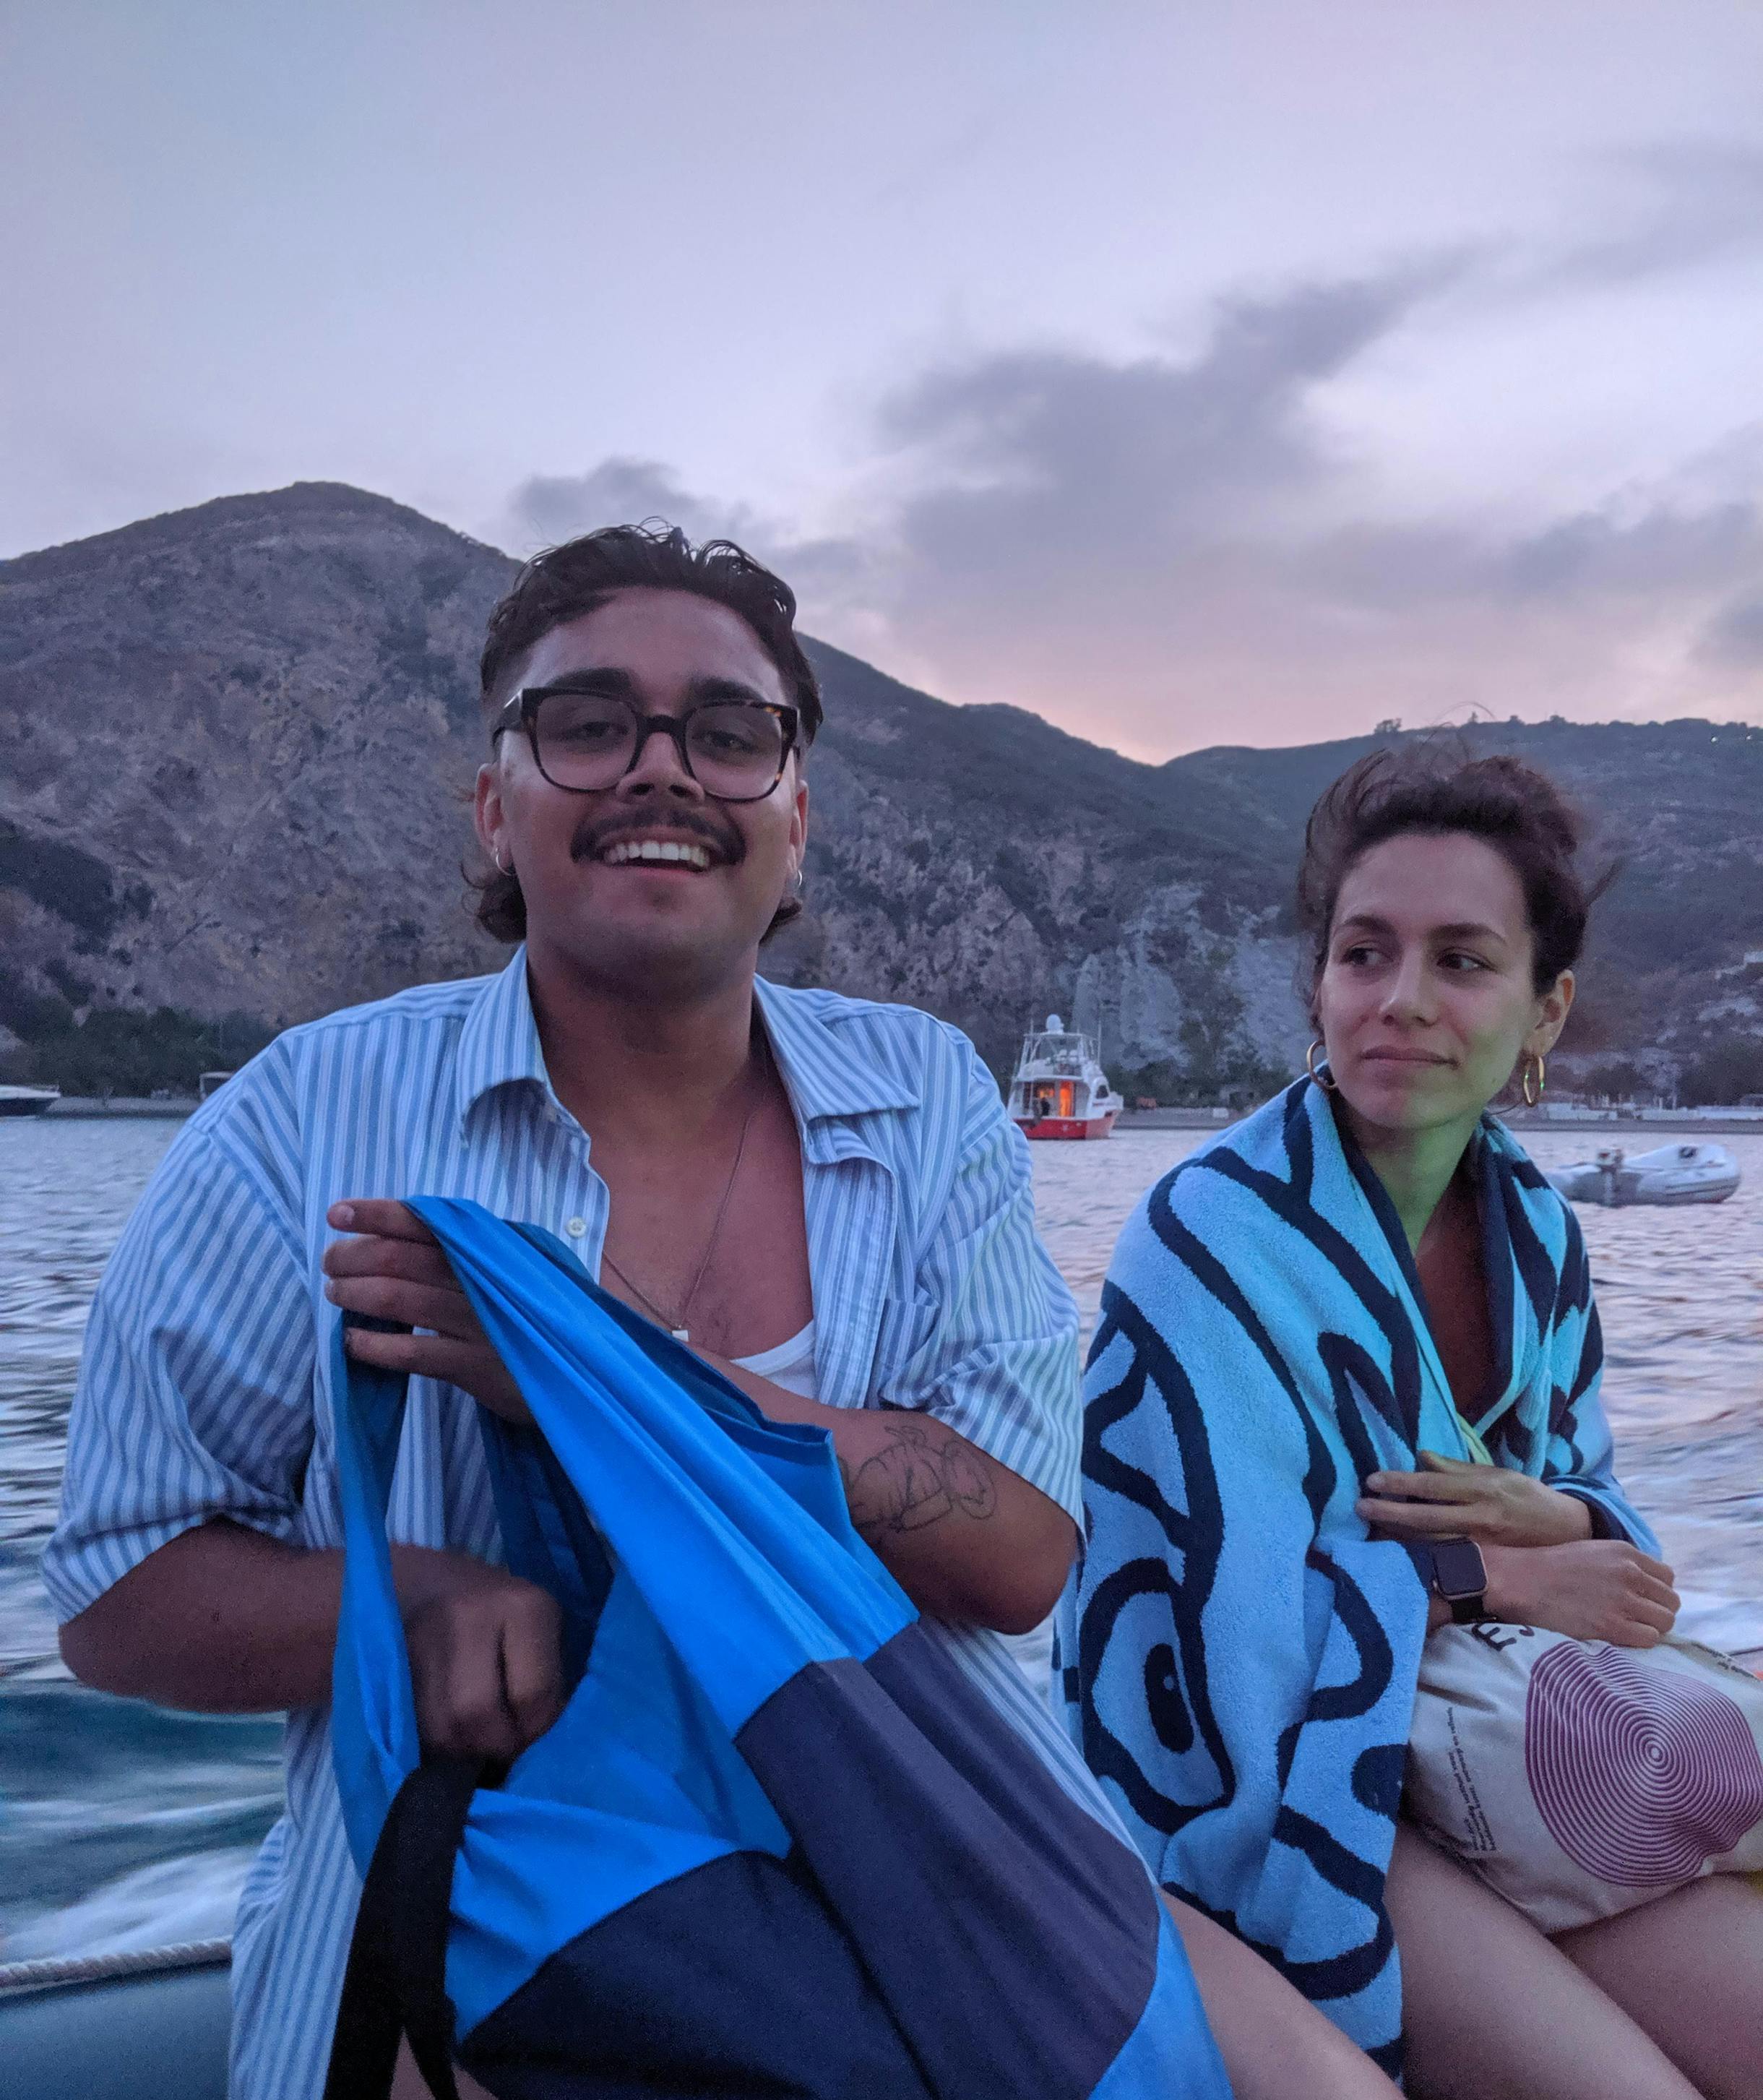 Smiling people on a boat